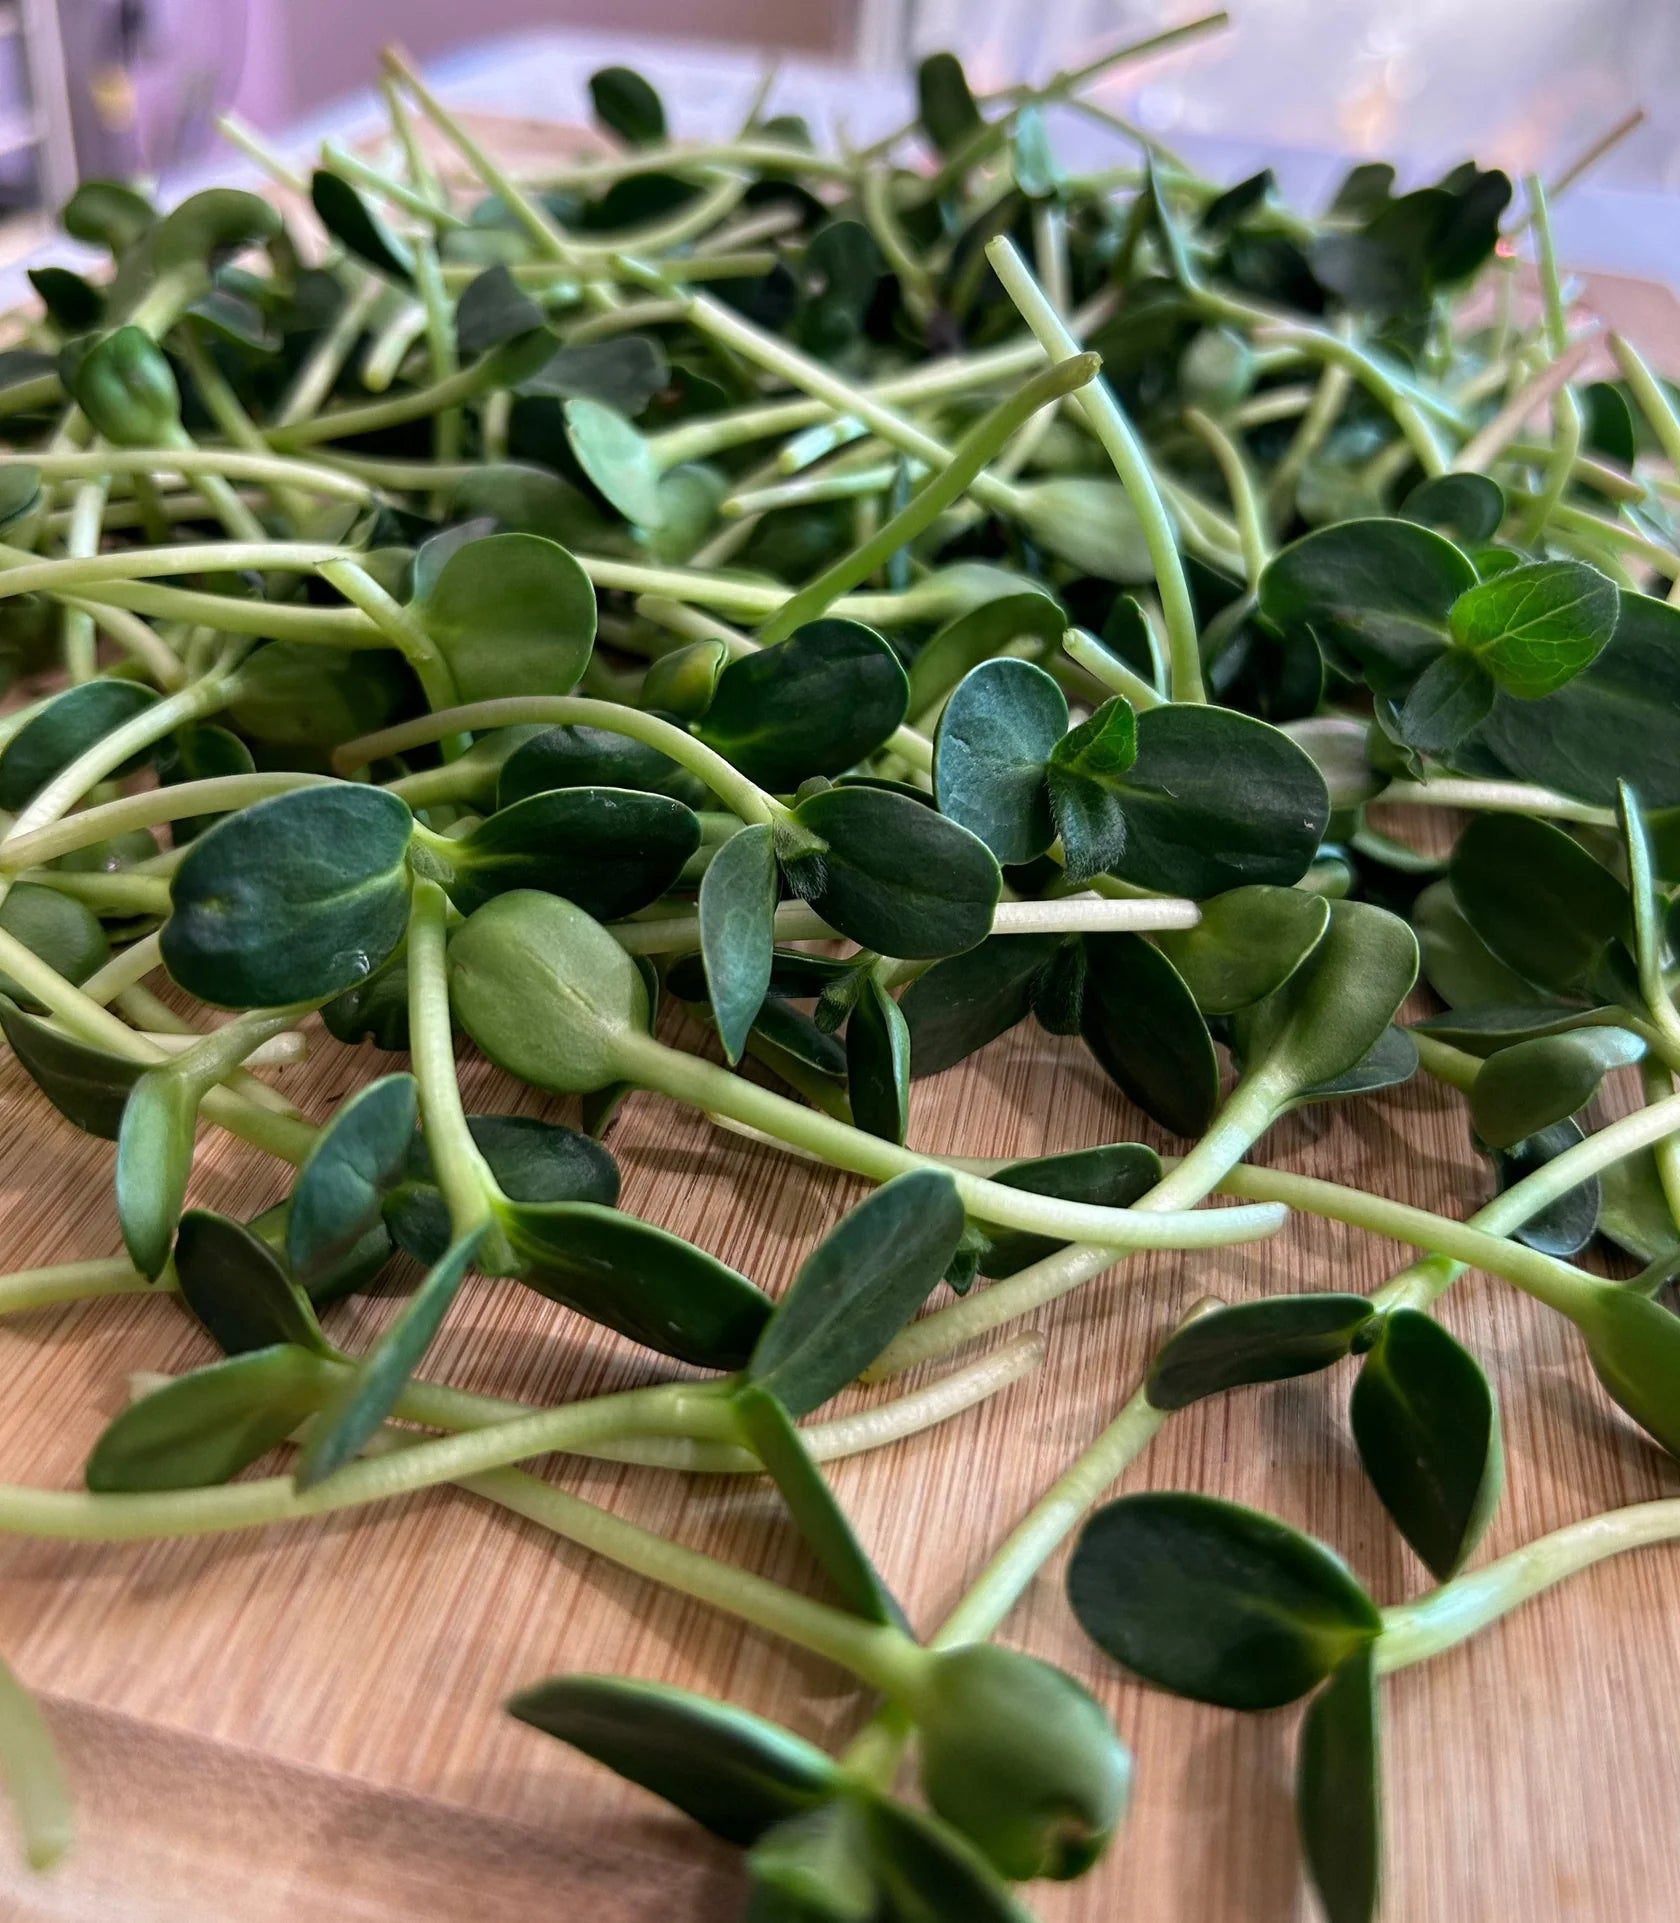 Sunflower Sprouts by Montreal Microgreens, 80g